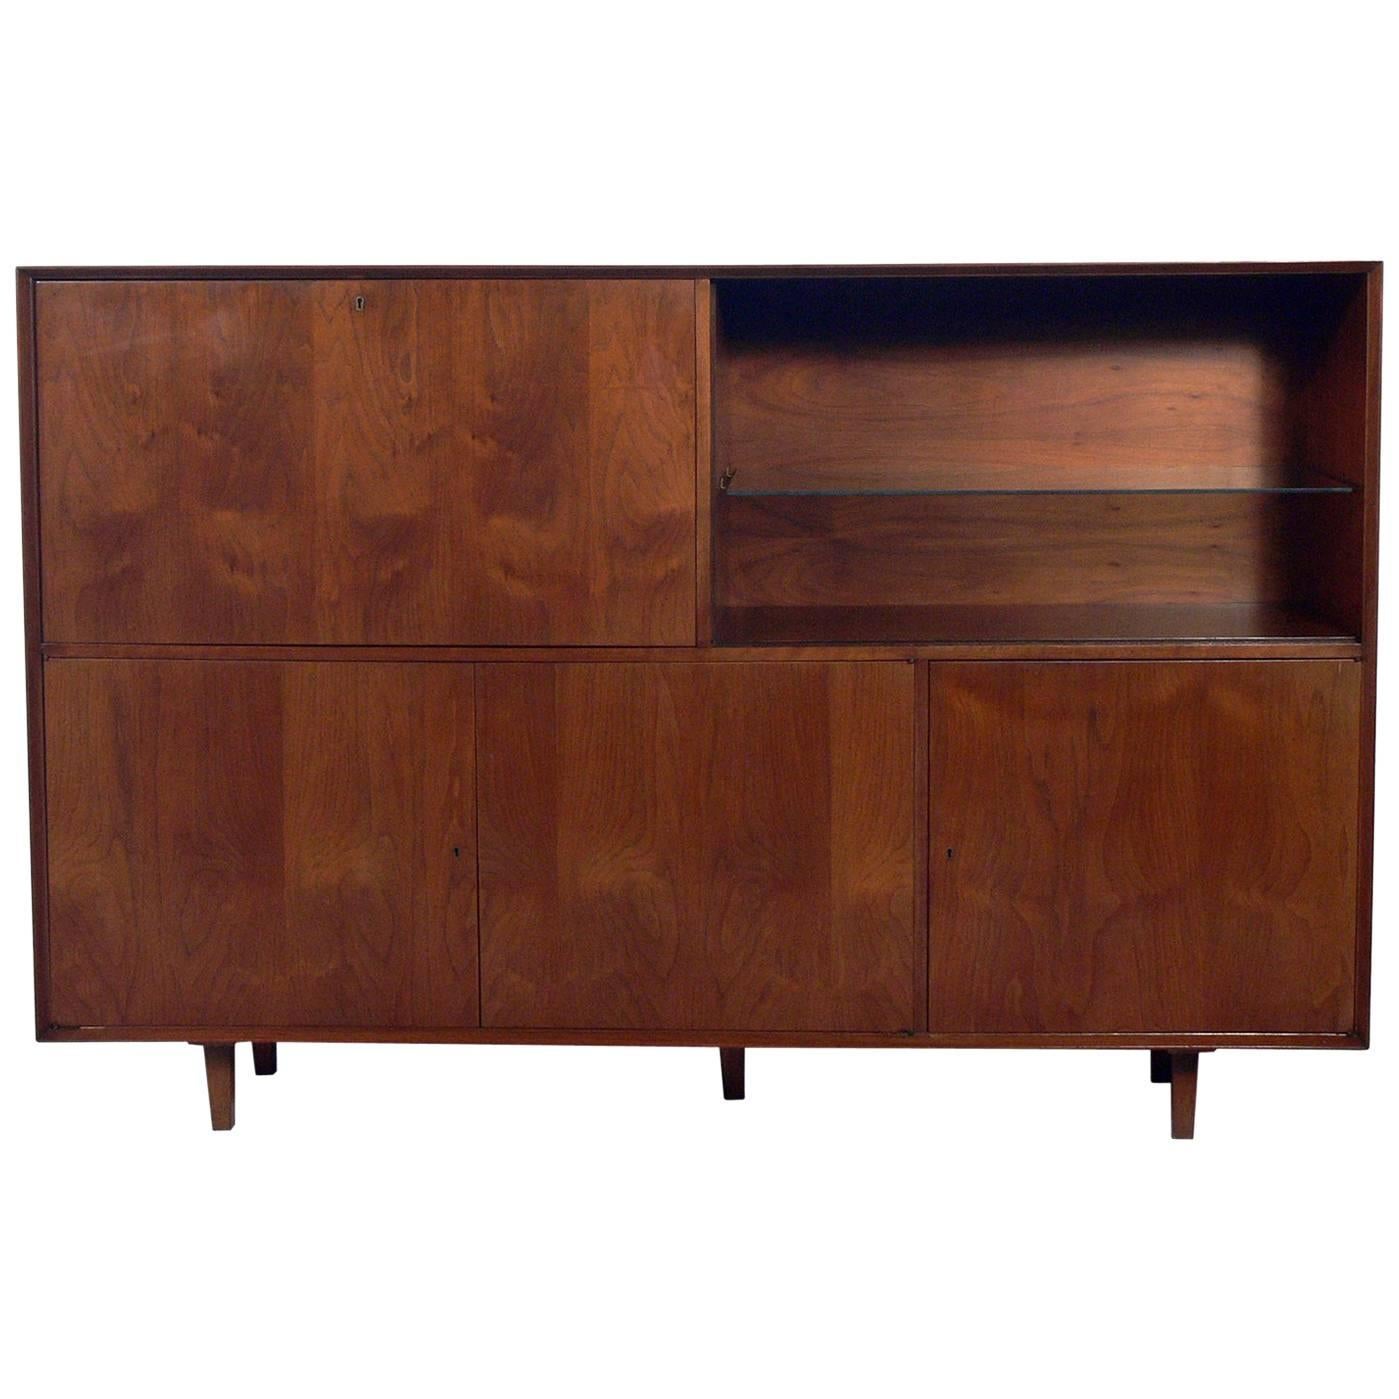 Large-Scale Midcentury Bar Cabinet or Credenza